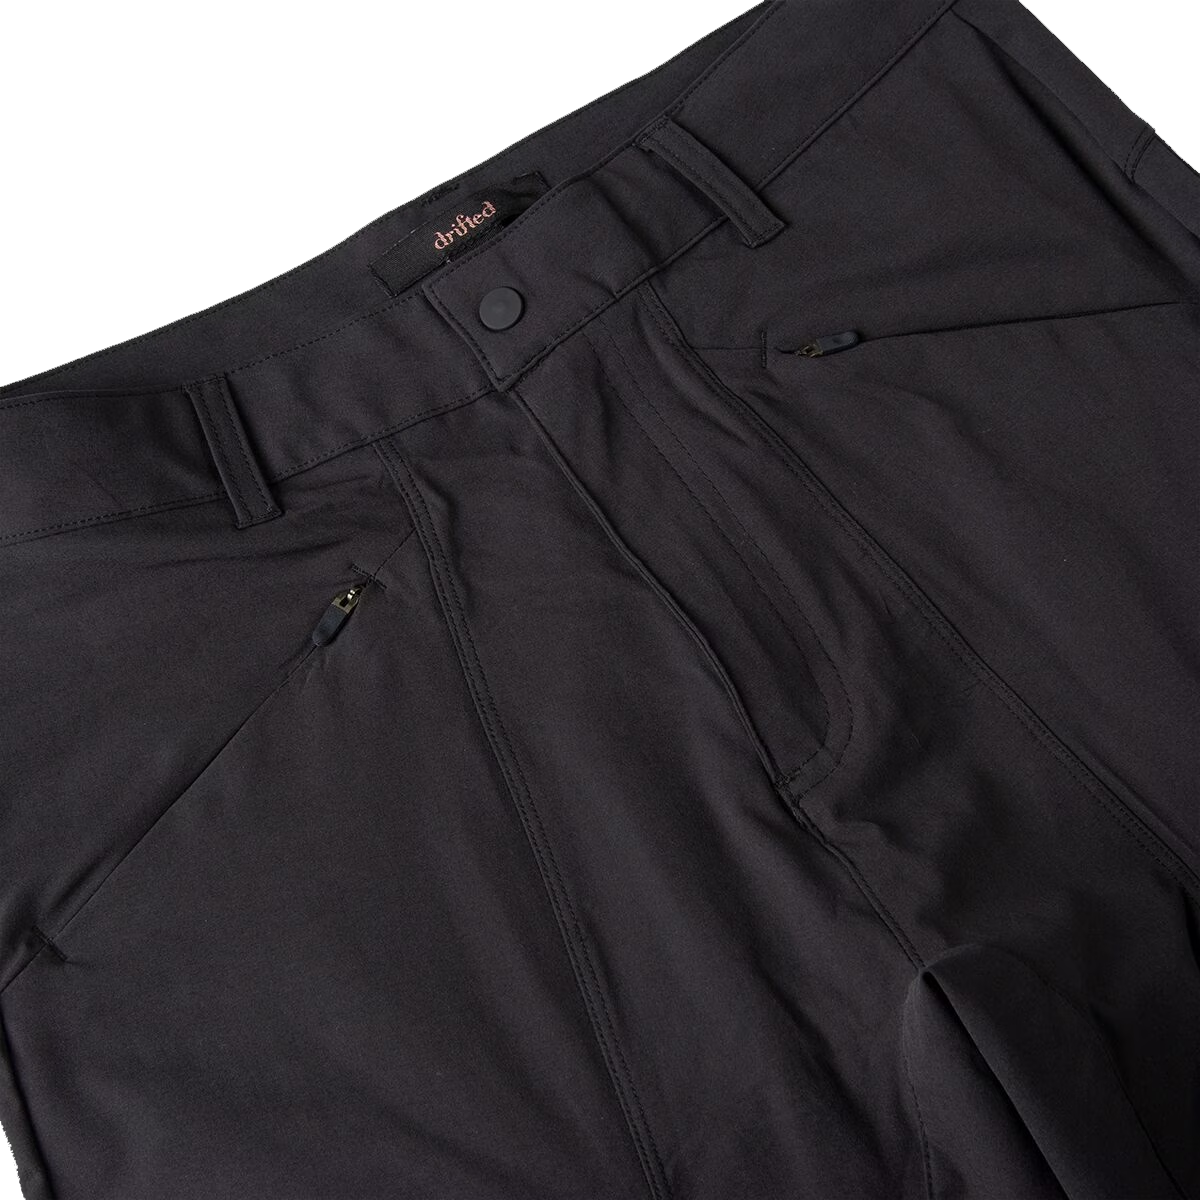 Women's High Waisted Trail Pants alternate view